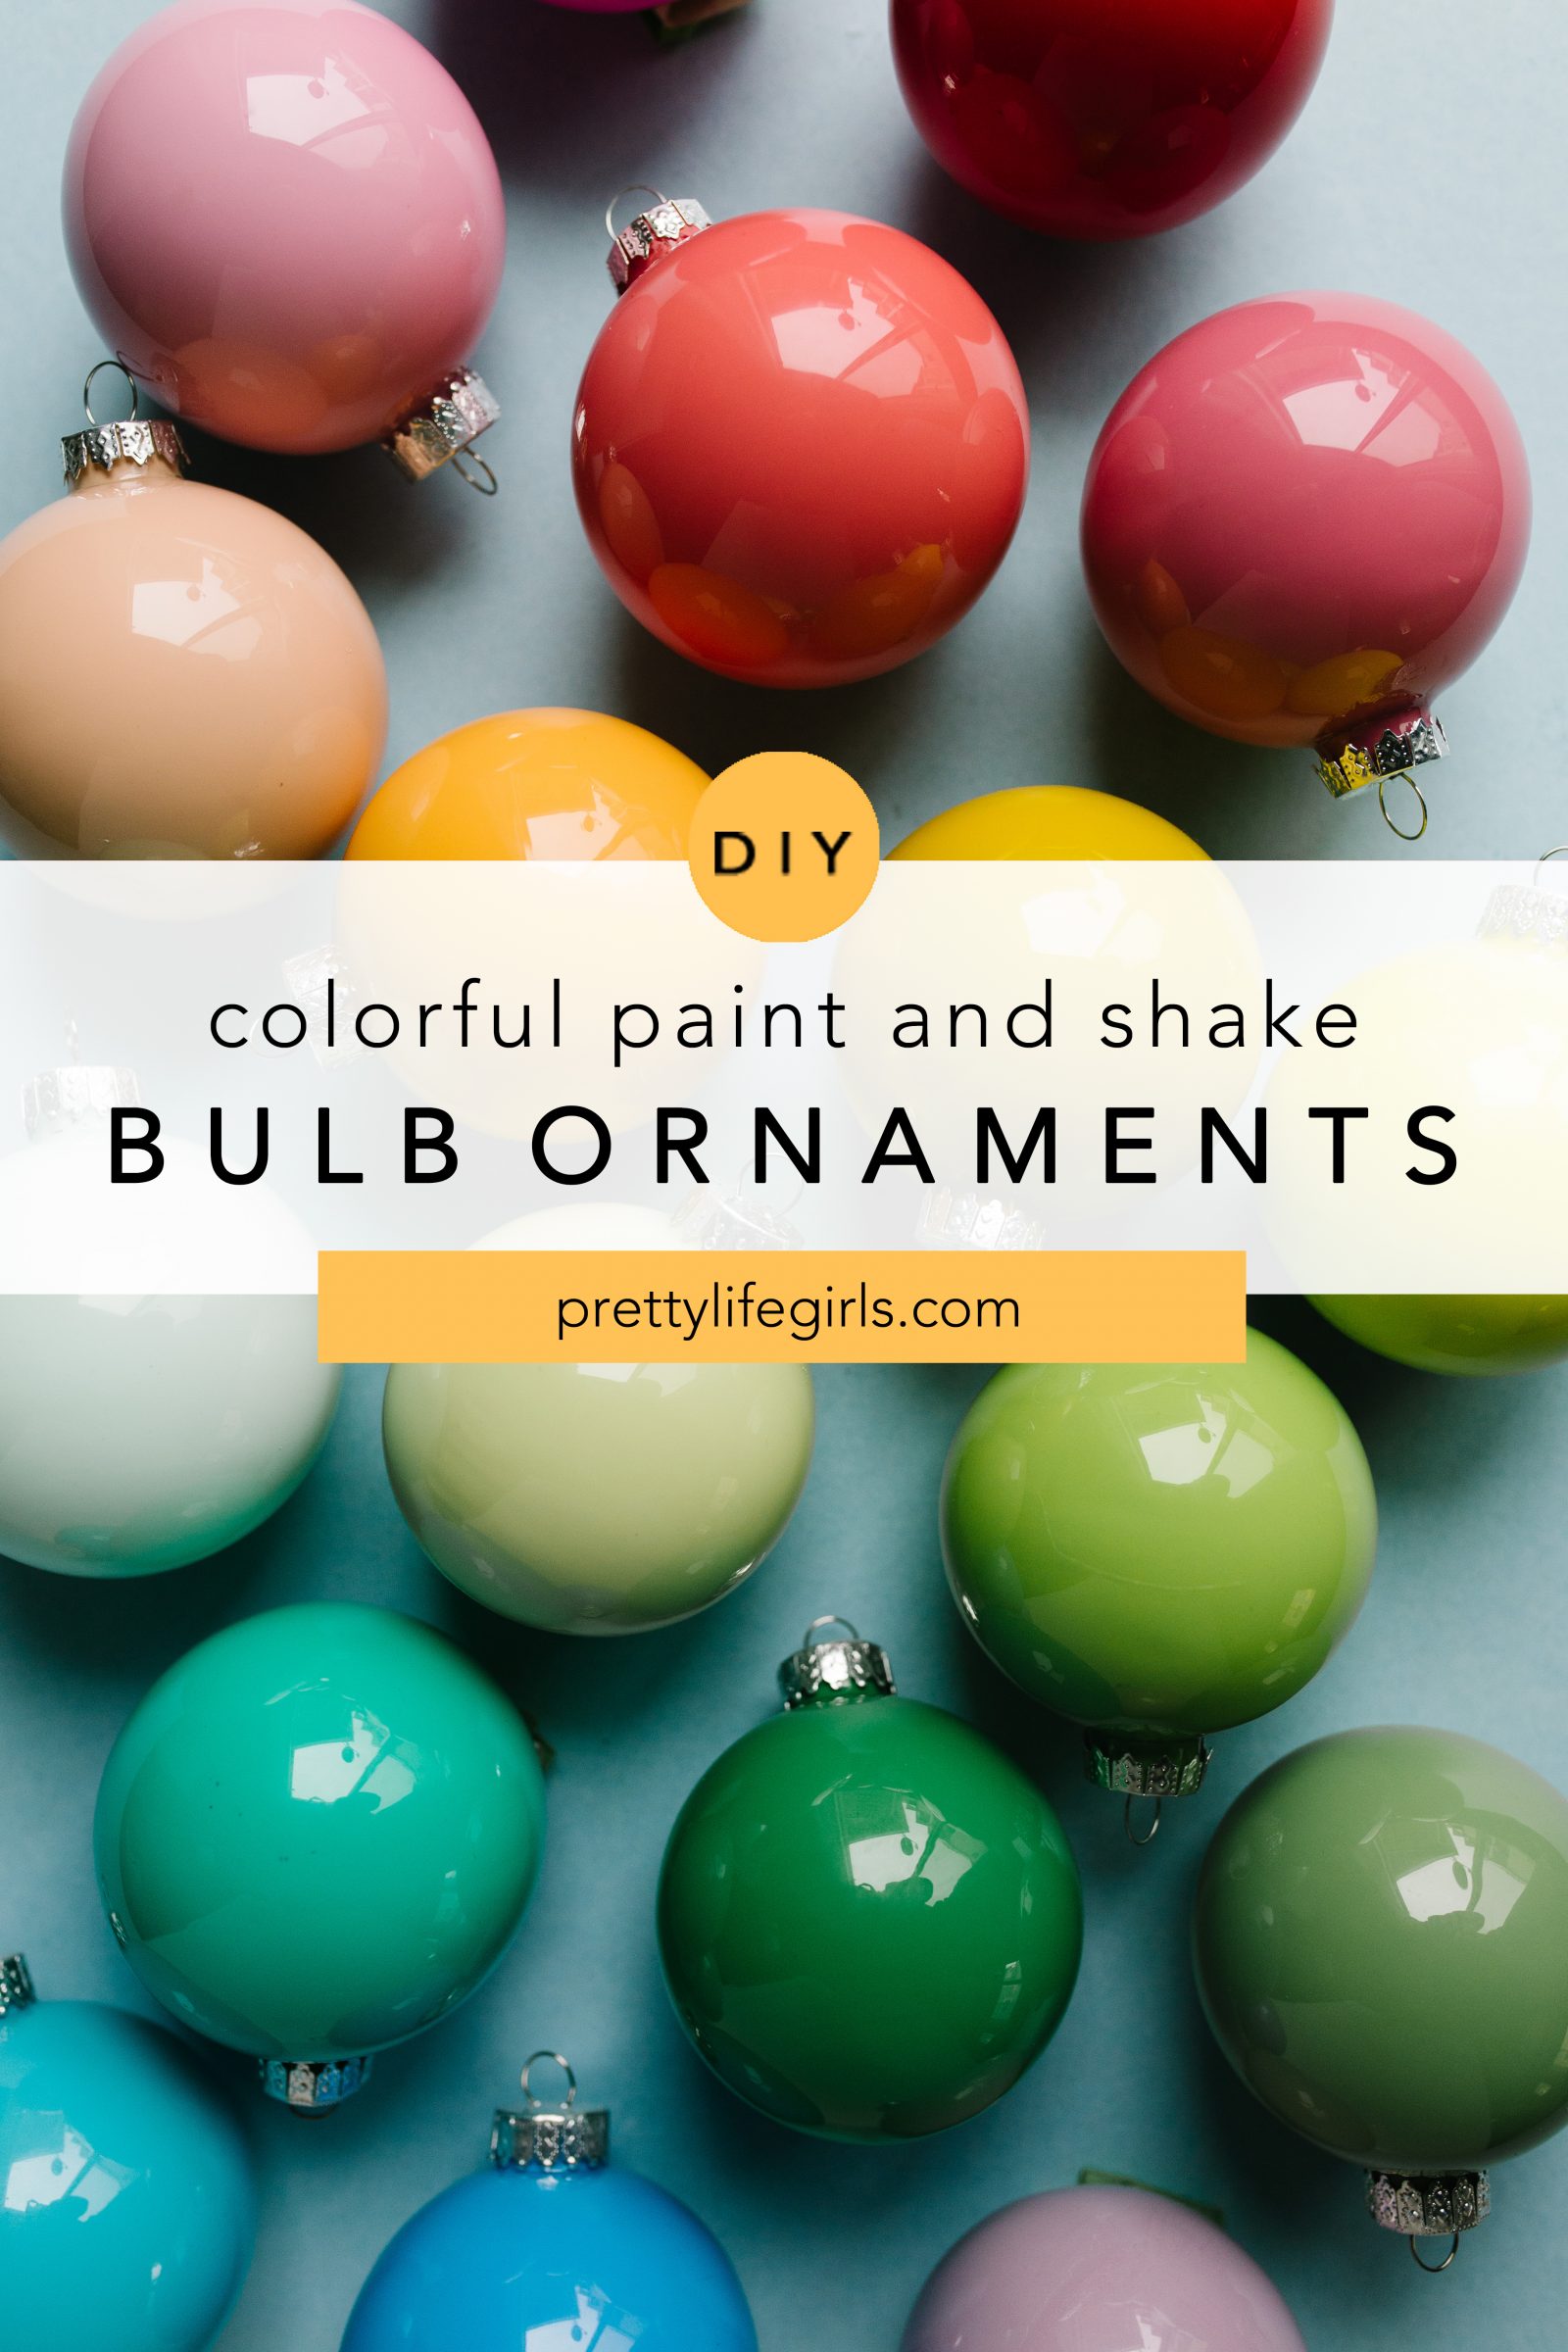 Christmas Crafts: Colorful Paint and Shake Bulb Ornaments + a tutorial featured by Top US Craft Blog + The Pretty Life Girls